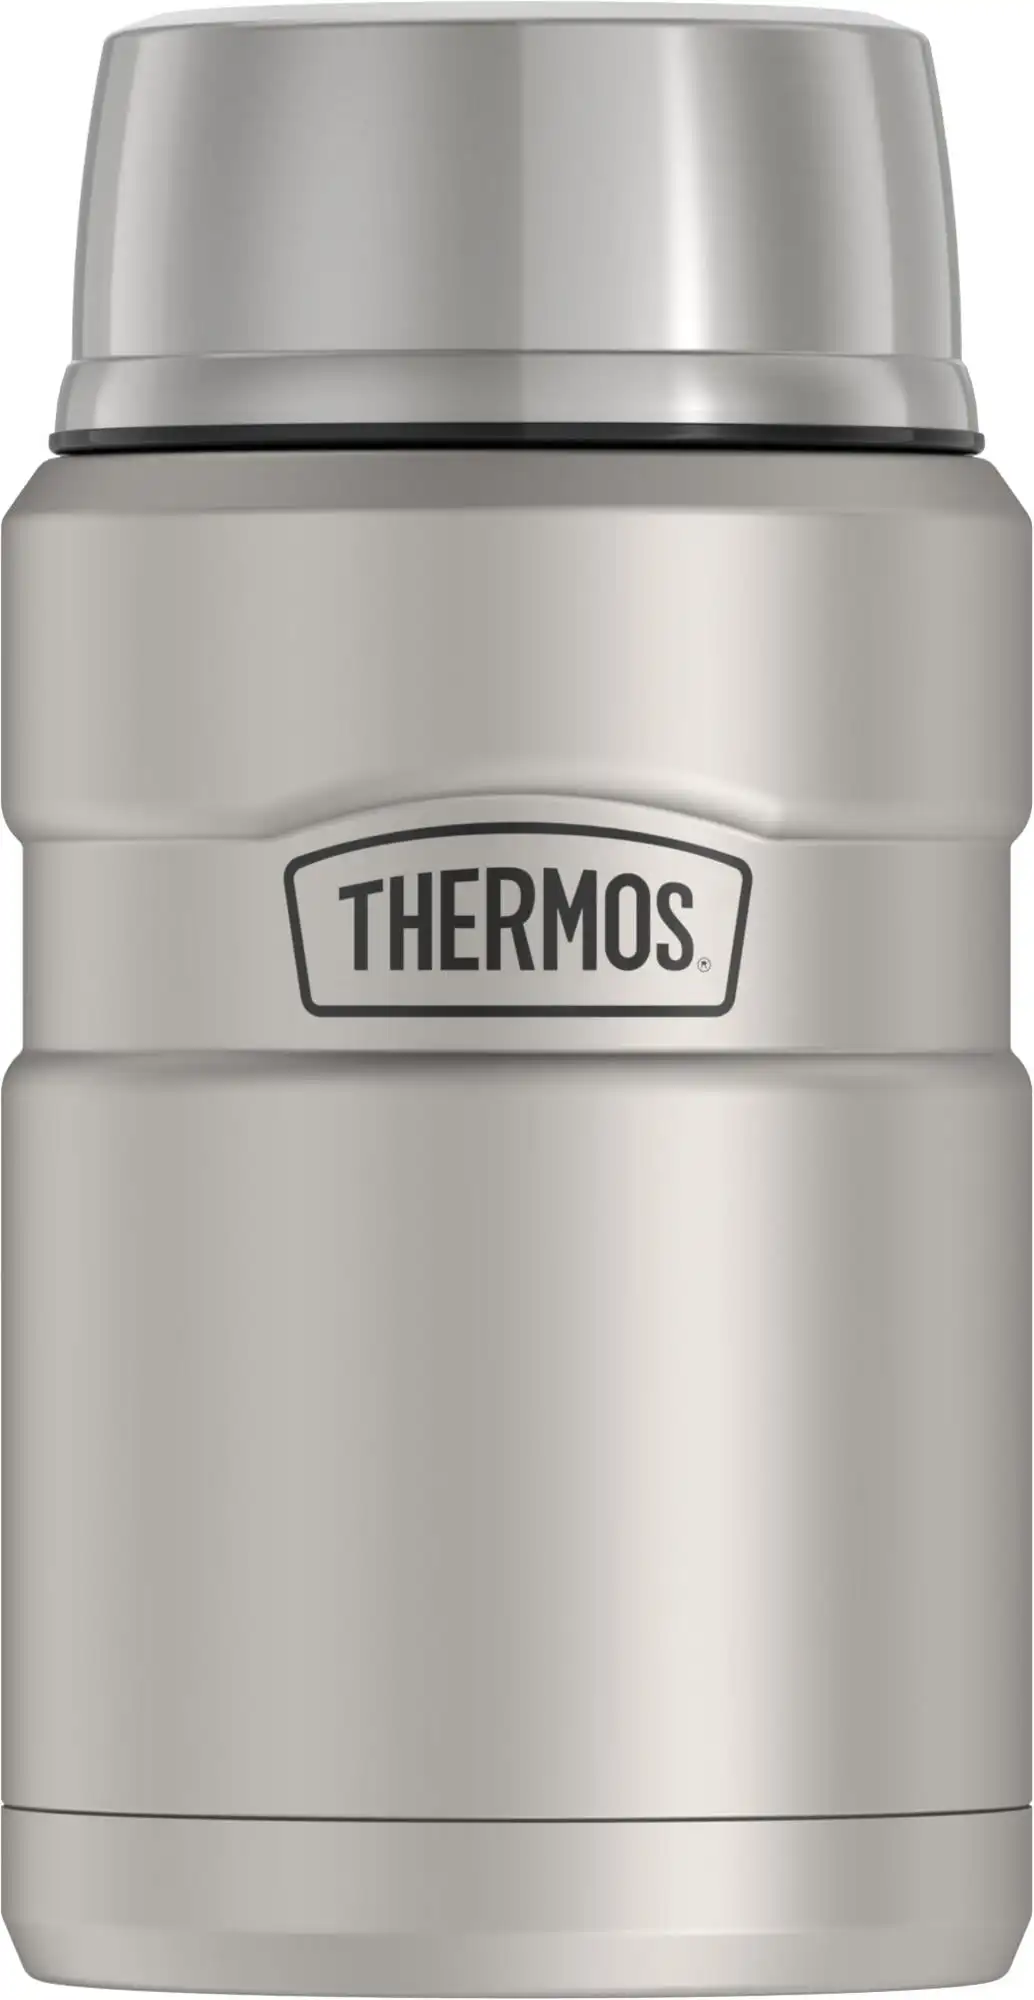 

Thermos Stainless King Vacuum-insulated Food Jar, 24 oz, Silver